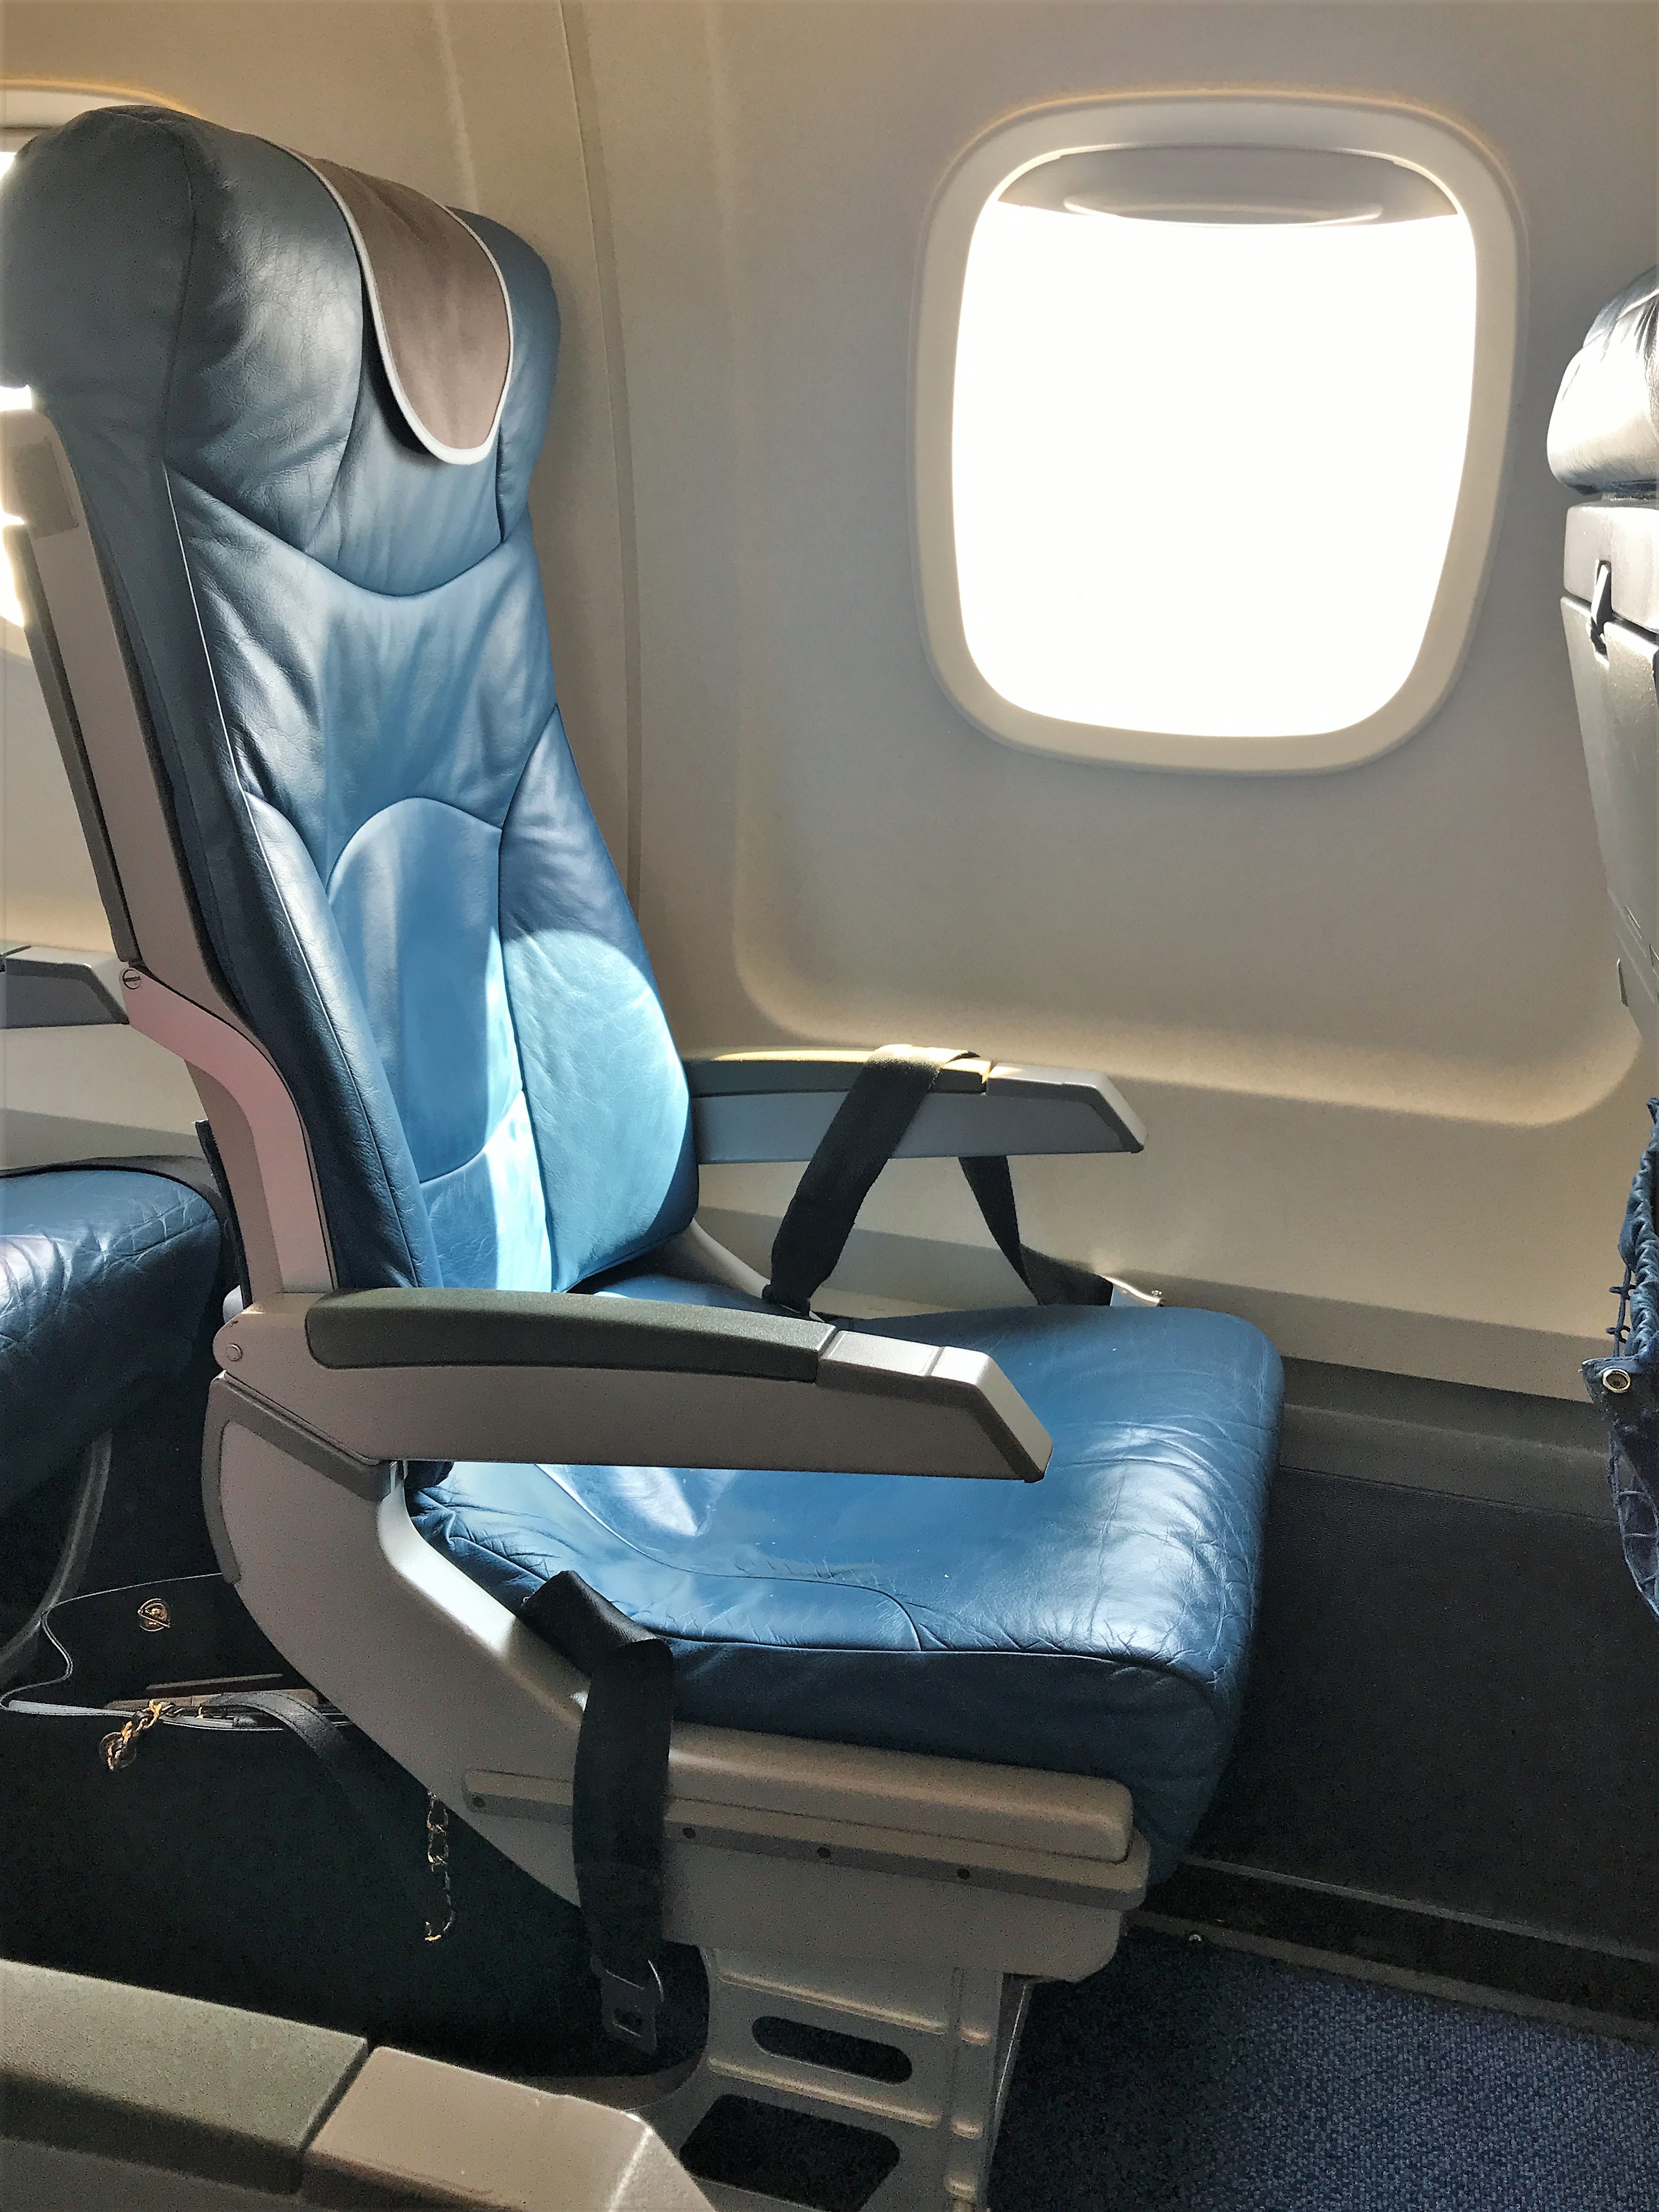 Flybmi E145 Flight Review Bristol Aspire Lounge Review